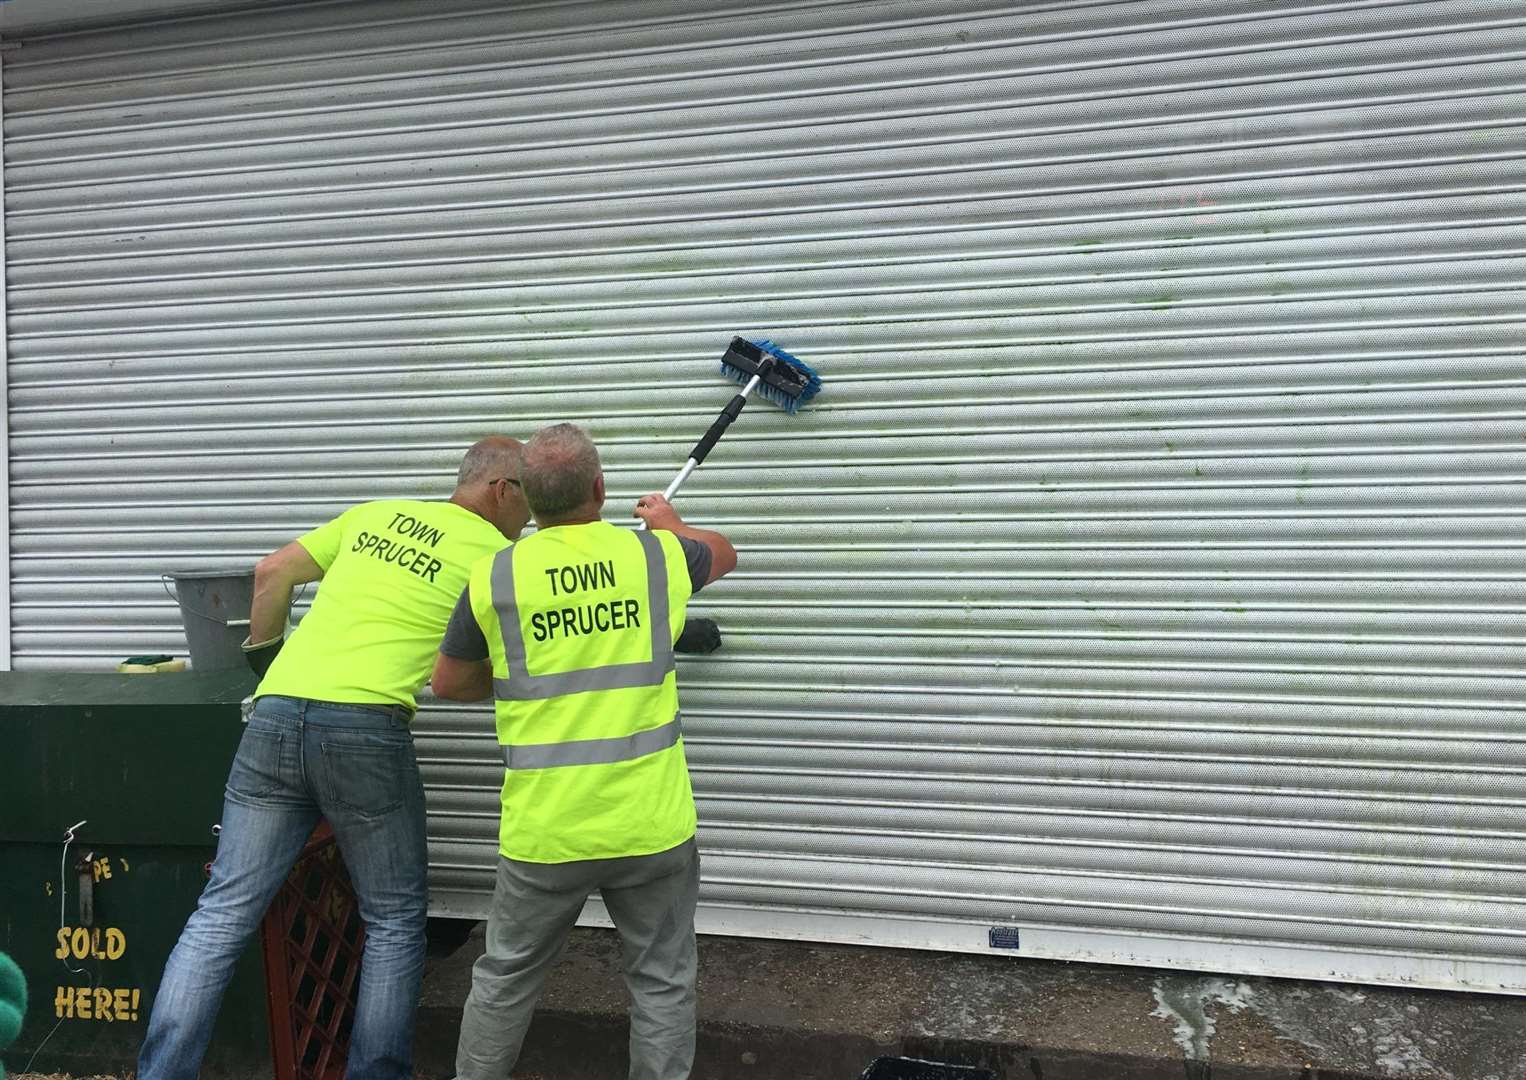 Job done. The shutter is cleaned. Picture provided by Peter Wallace